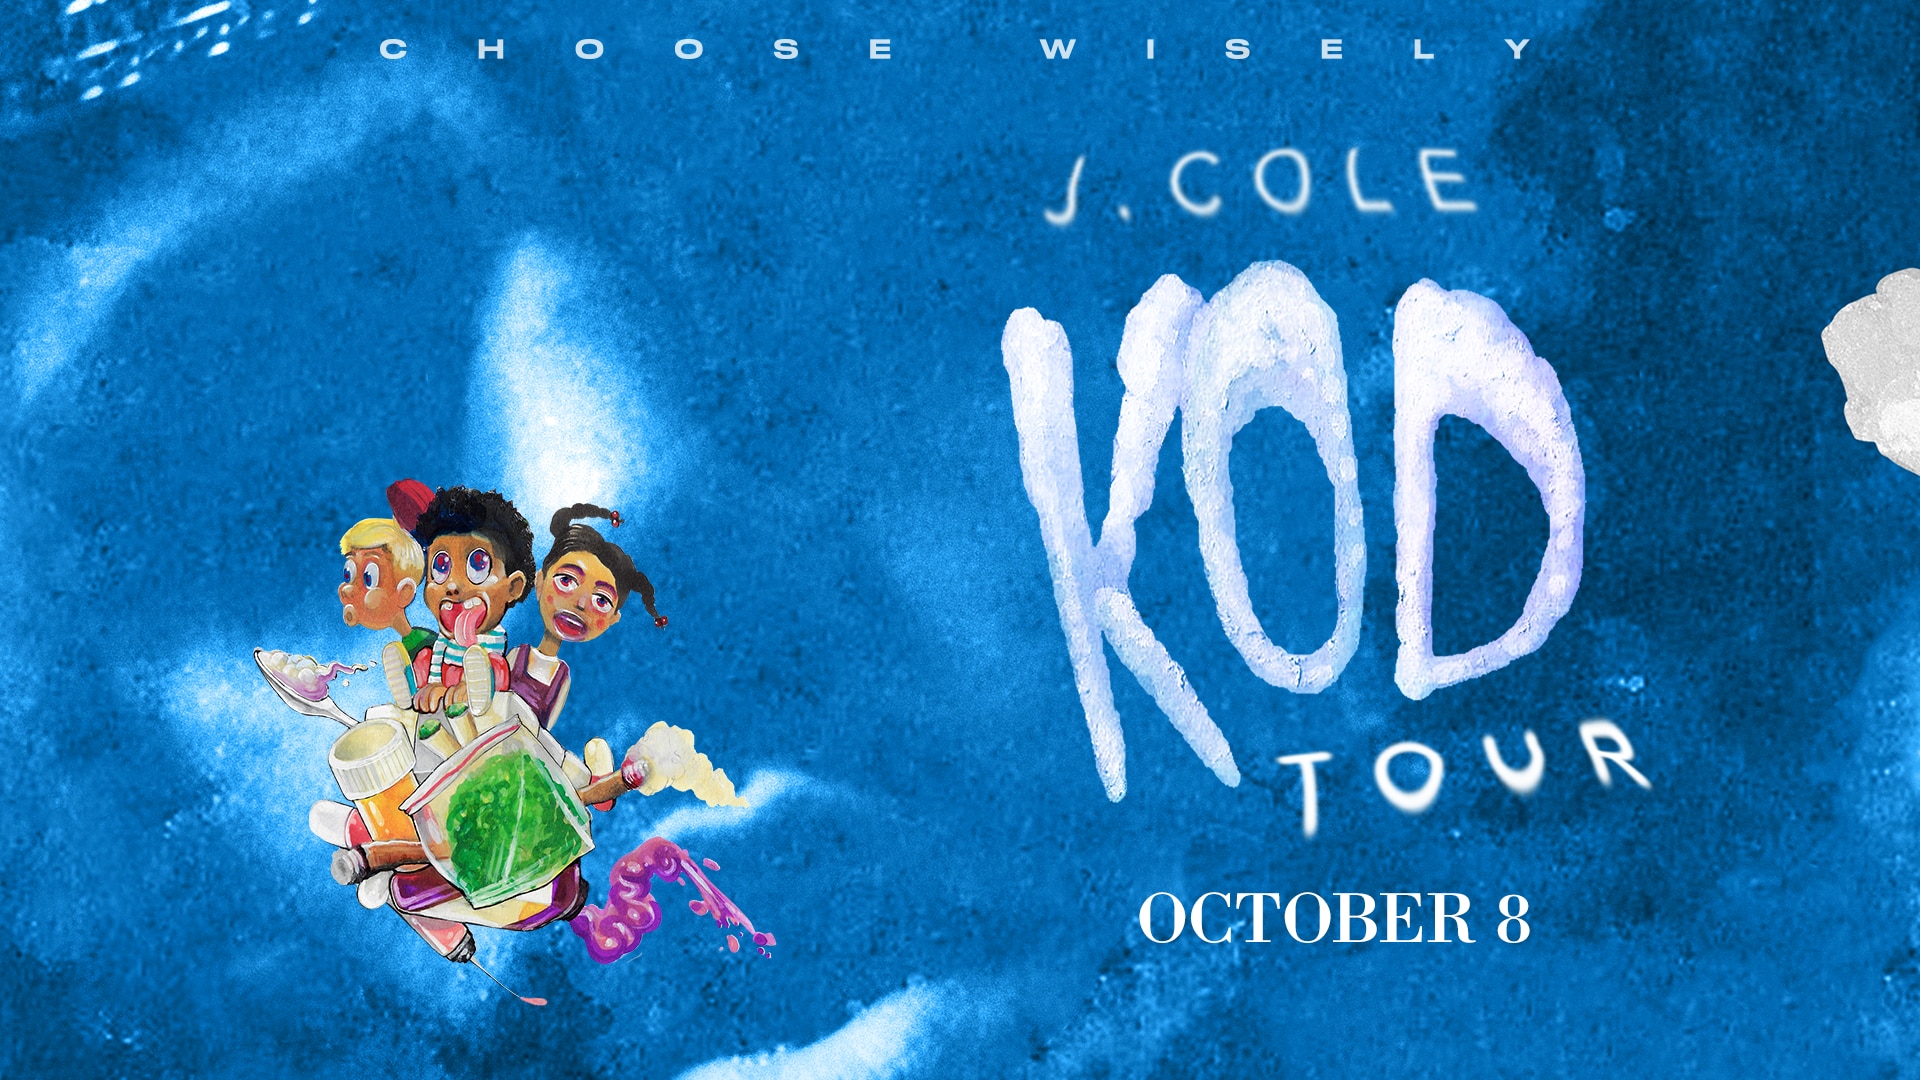 J Cole Young Thug Tour , HD Wallpaper & Backgrounds